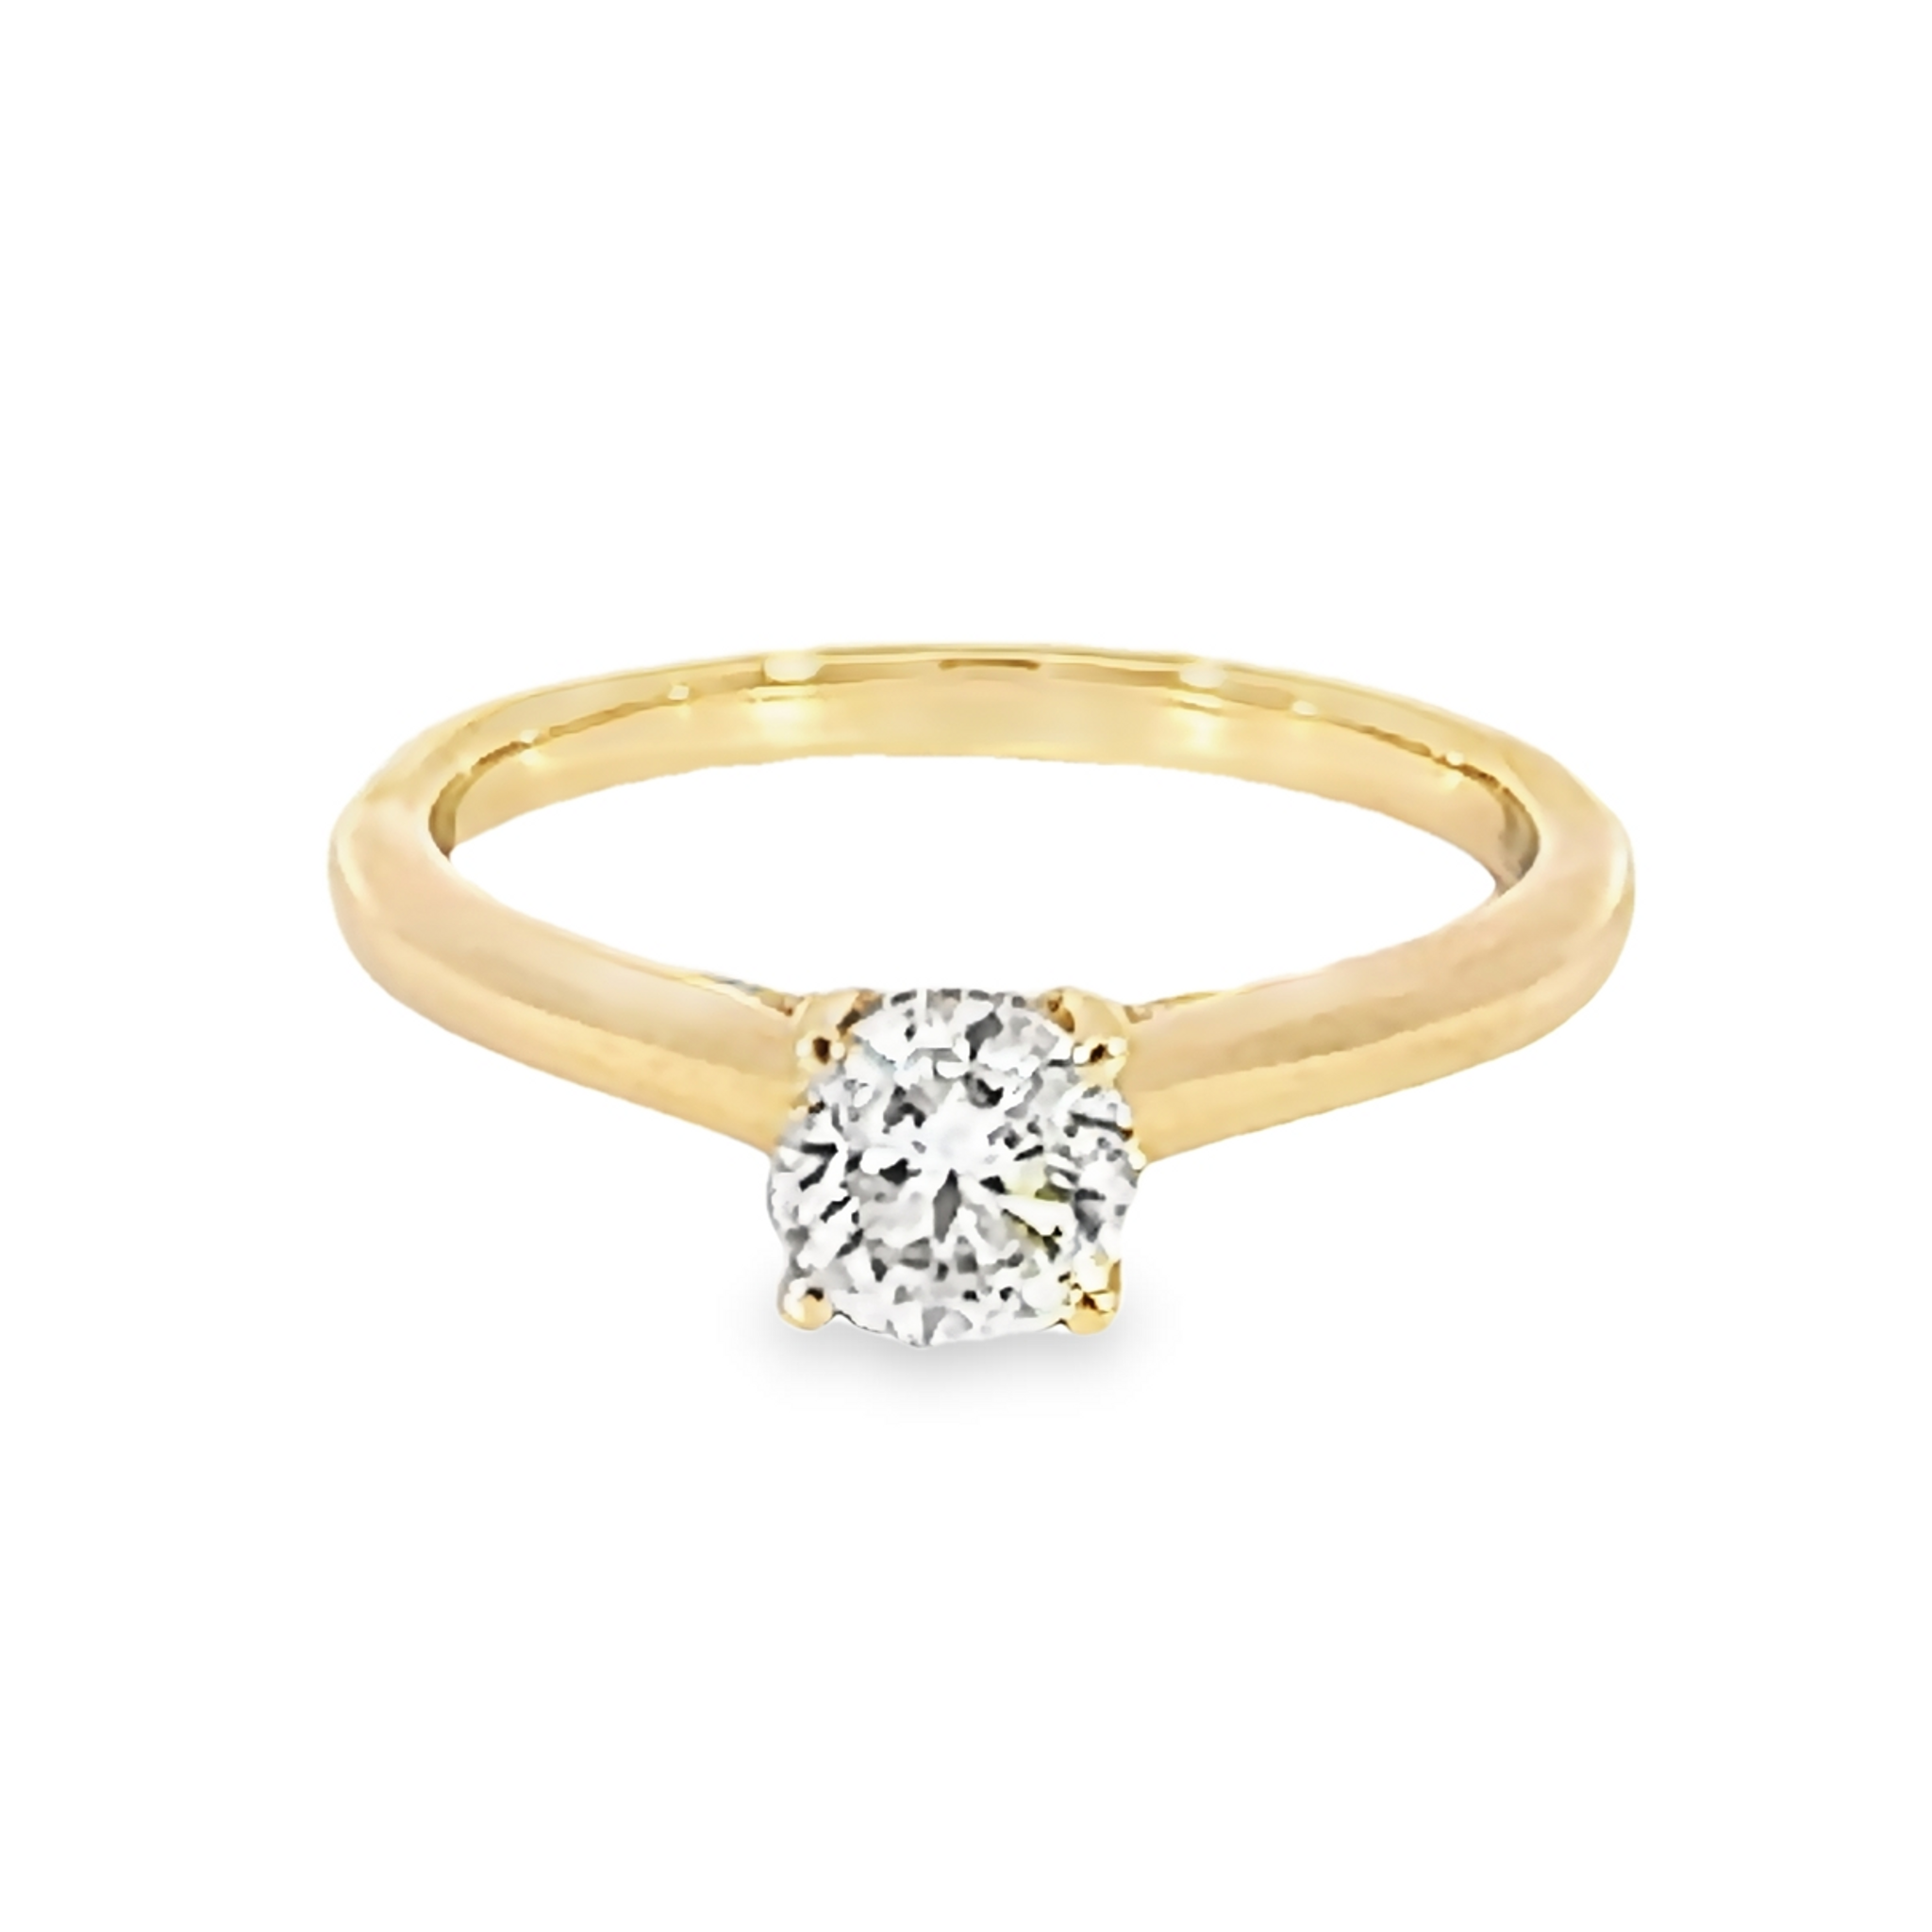 14 Karat yellow gold engagement ring with One 0.71Ct Round Brilliant K SI1 Diamond And 26=0.06 total weight Round Brilliant G SI Diamonds